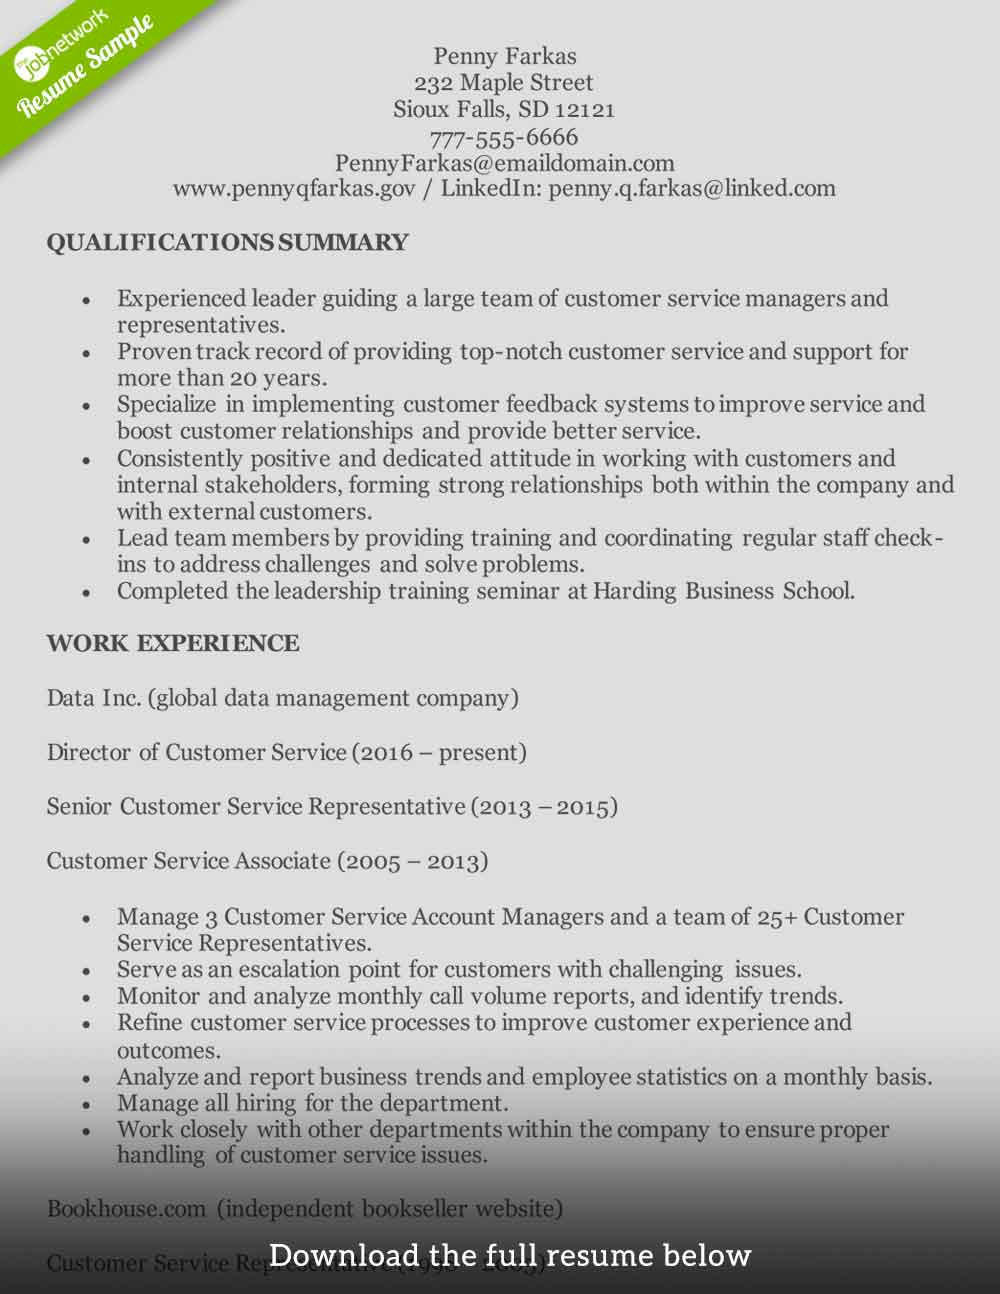 Best Customer Service Resume Summary Samples Customer Service Resume -how to Write the Perfect One (examples)